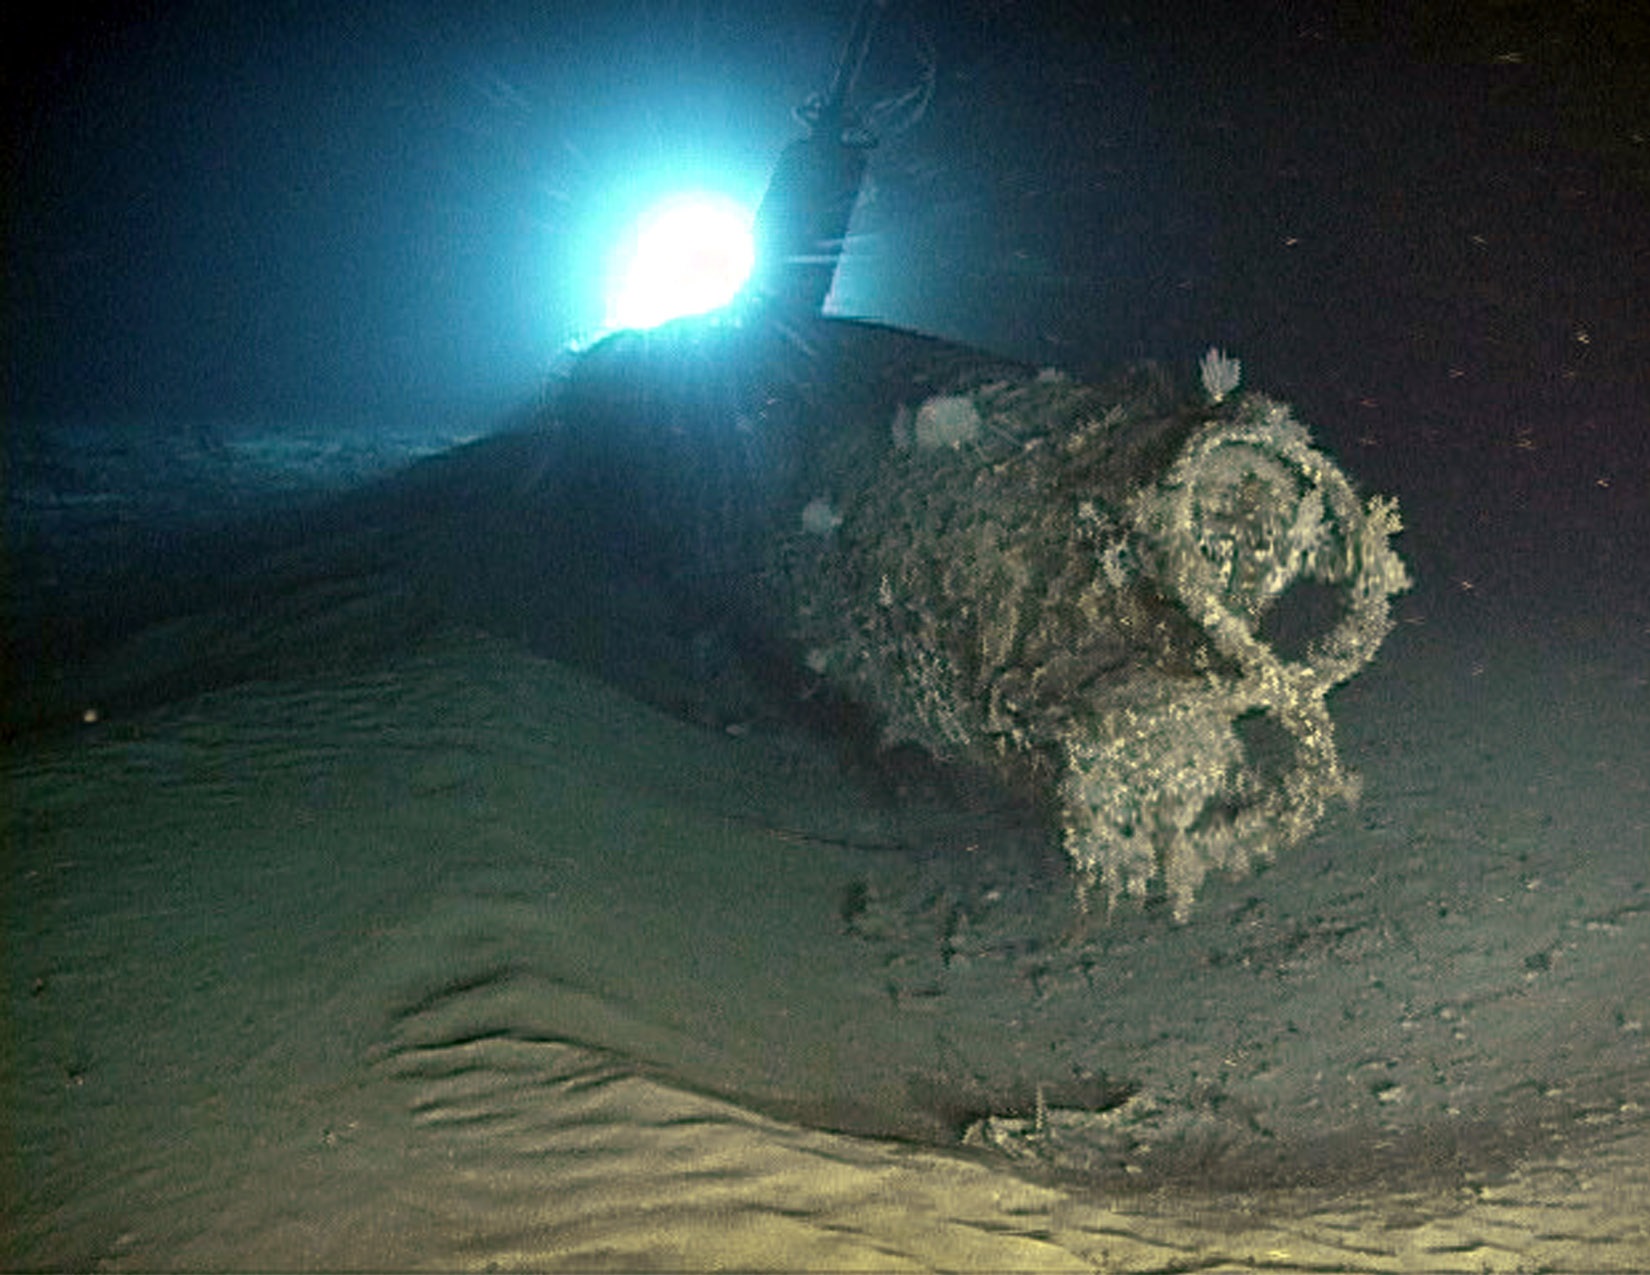 The bow of the Ward mini submarine at the time of the discovery in 2002. Credit: University of Hawaii/HURL